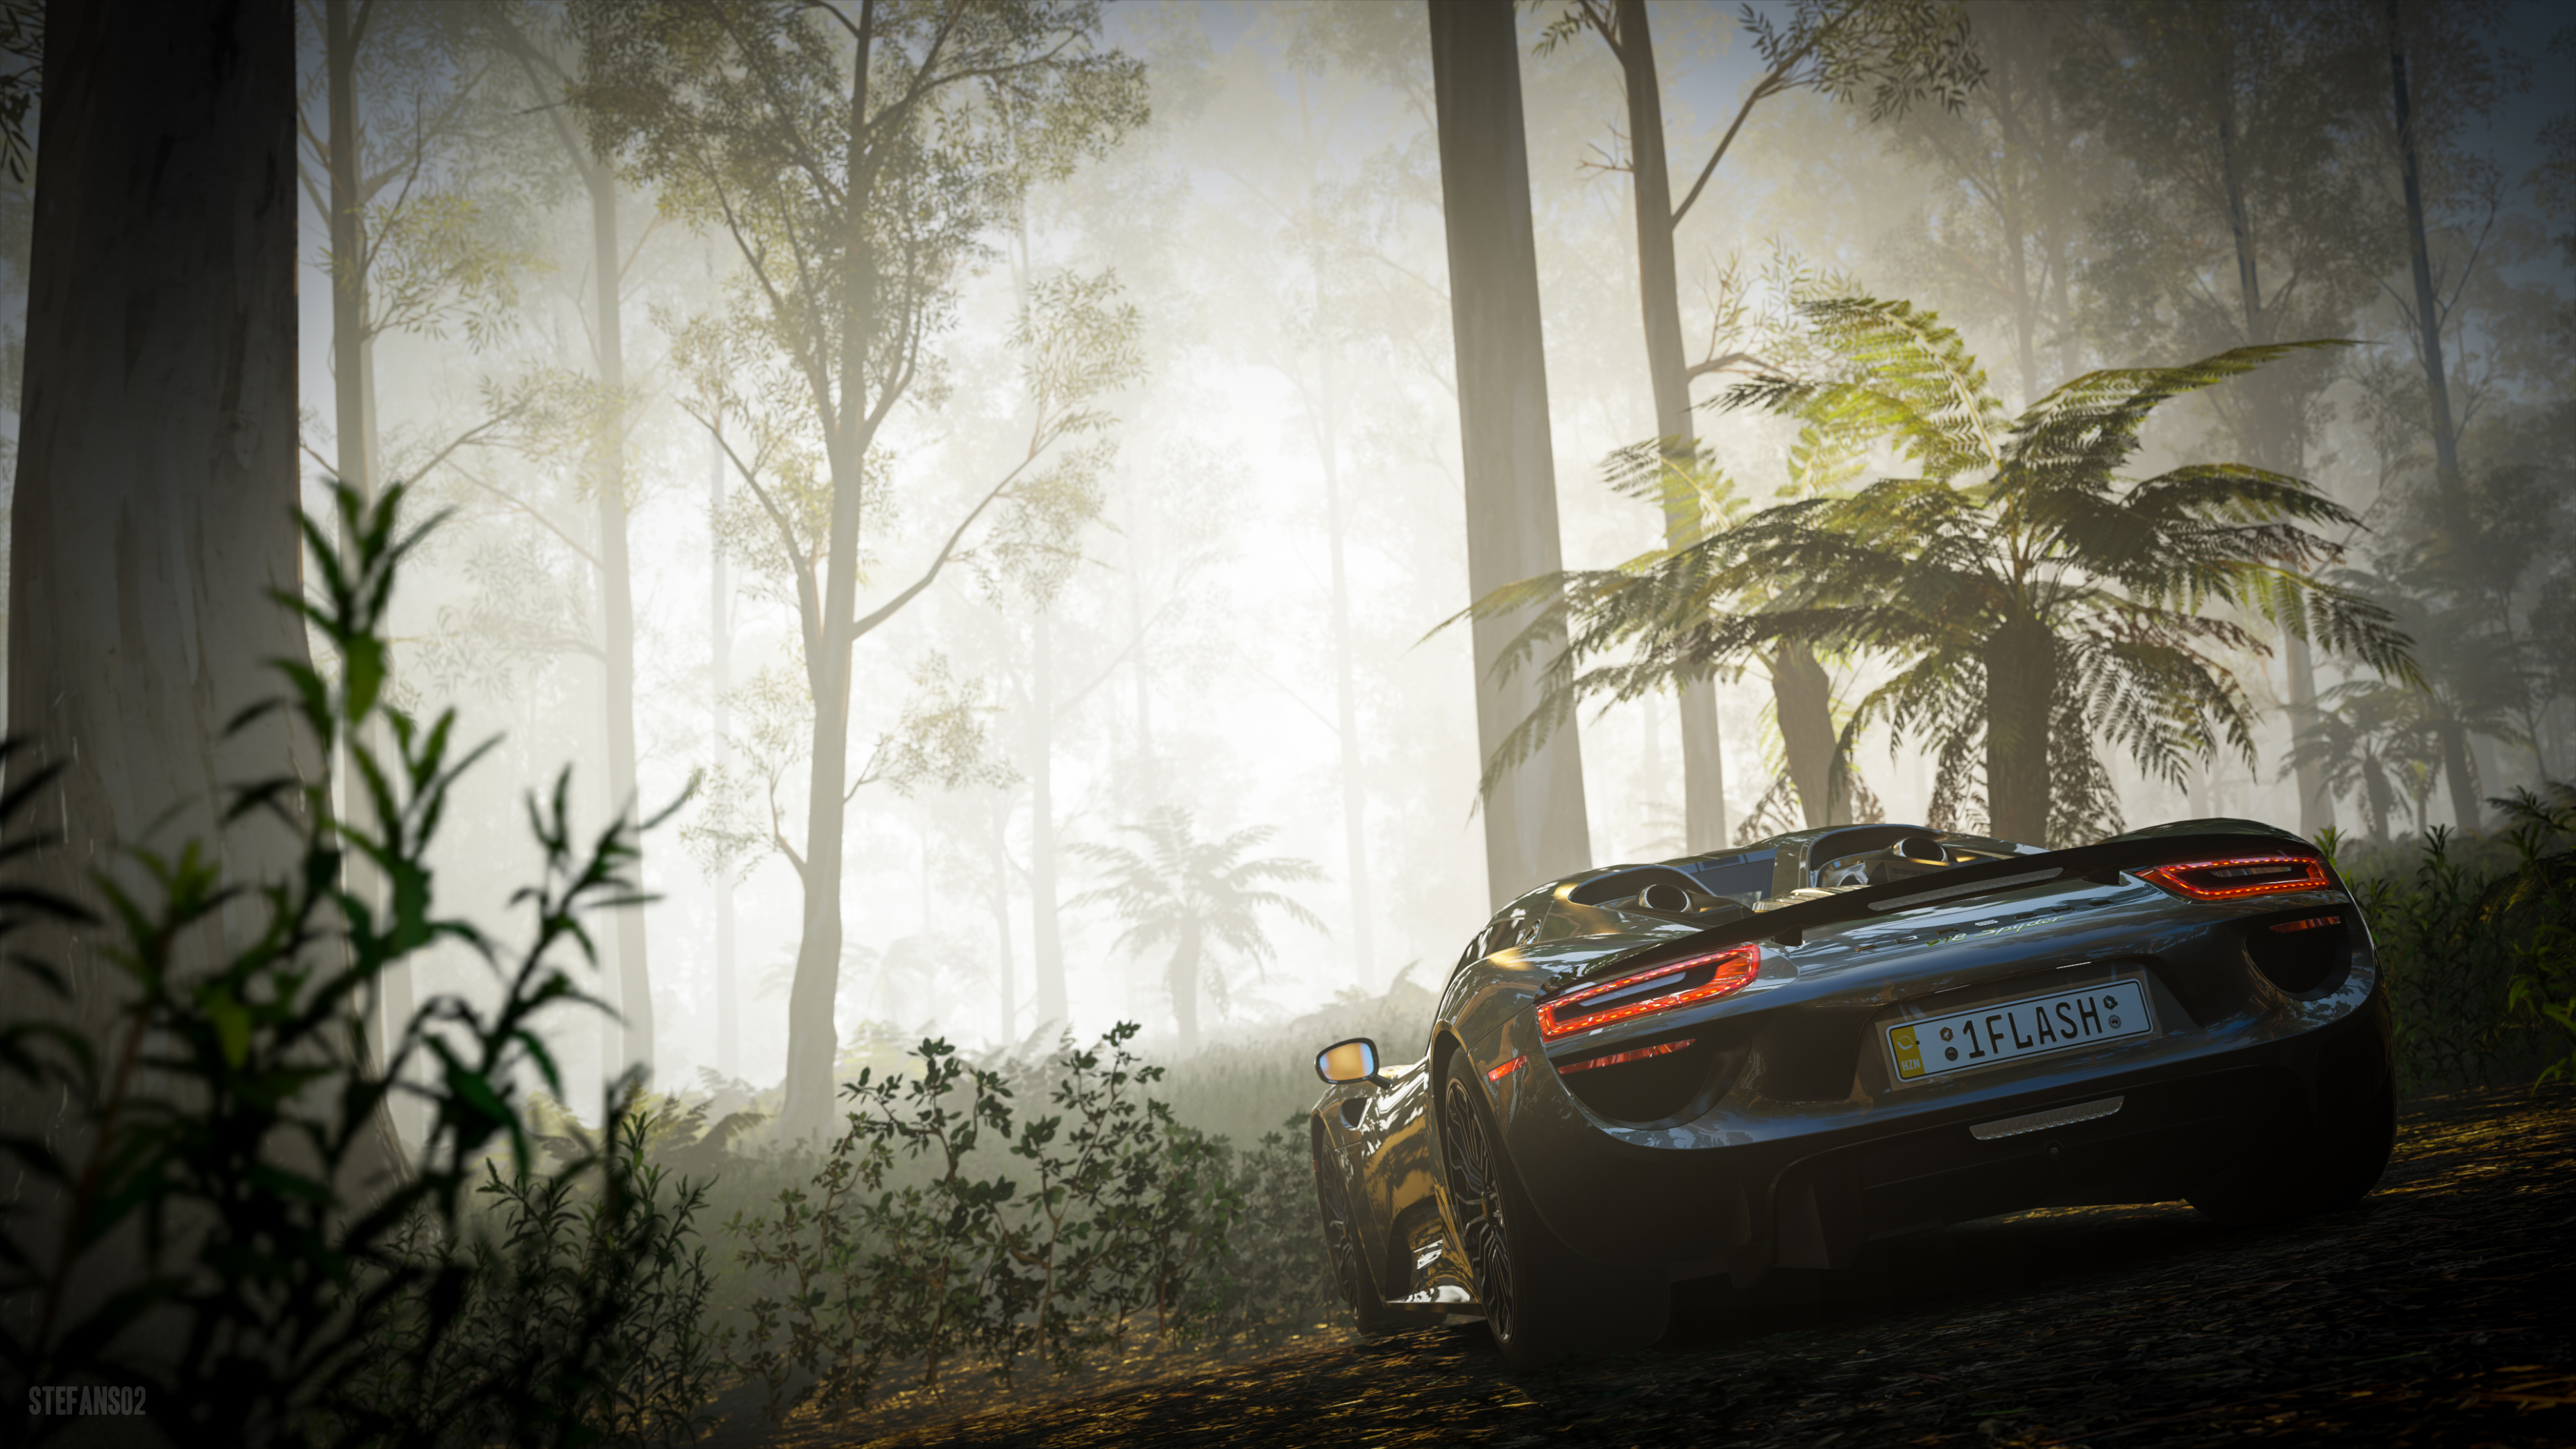 Forza Horizon 3 / The Morning Mist by StefanS02